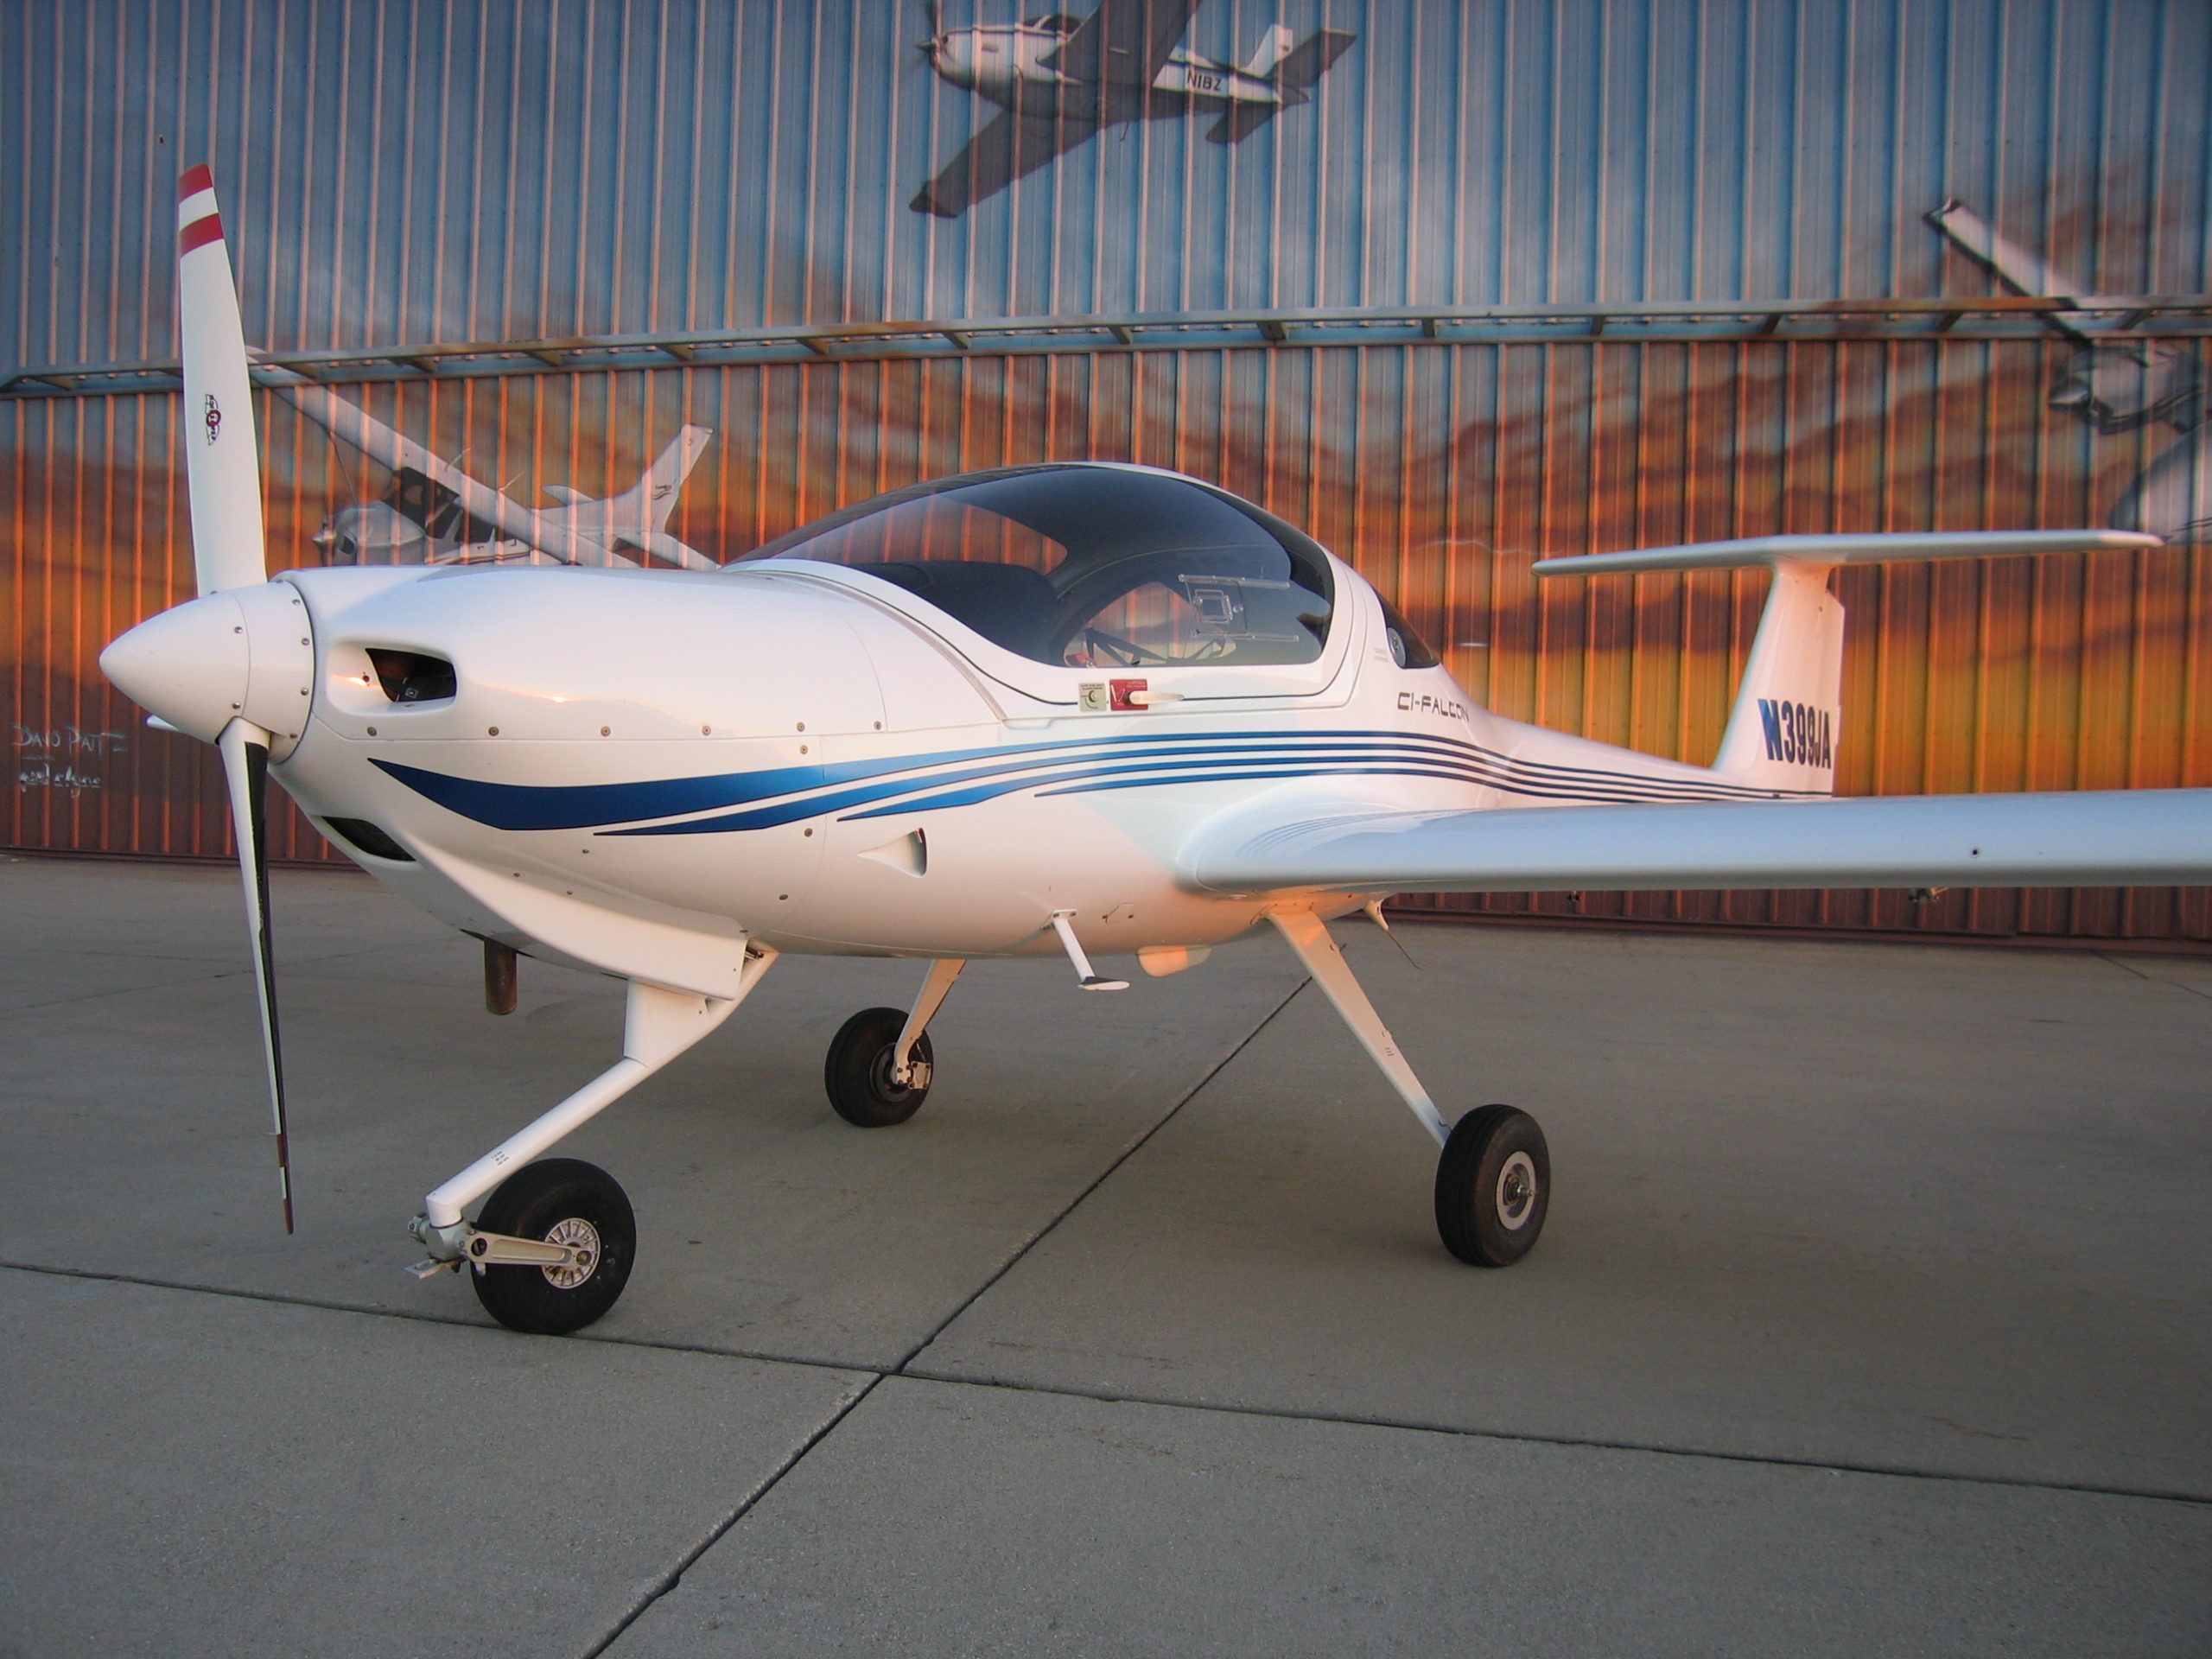 Rite of passage aircraft for new pilots